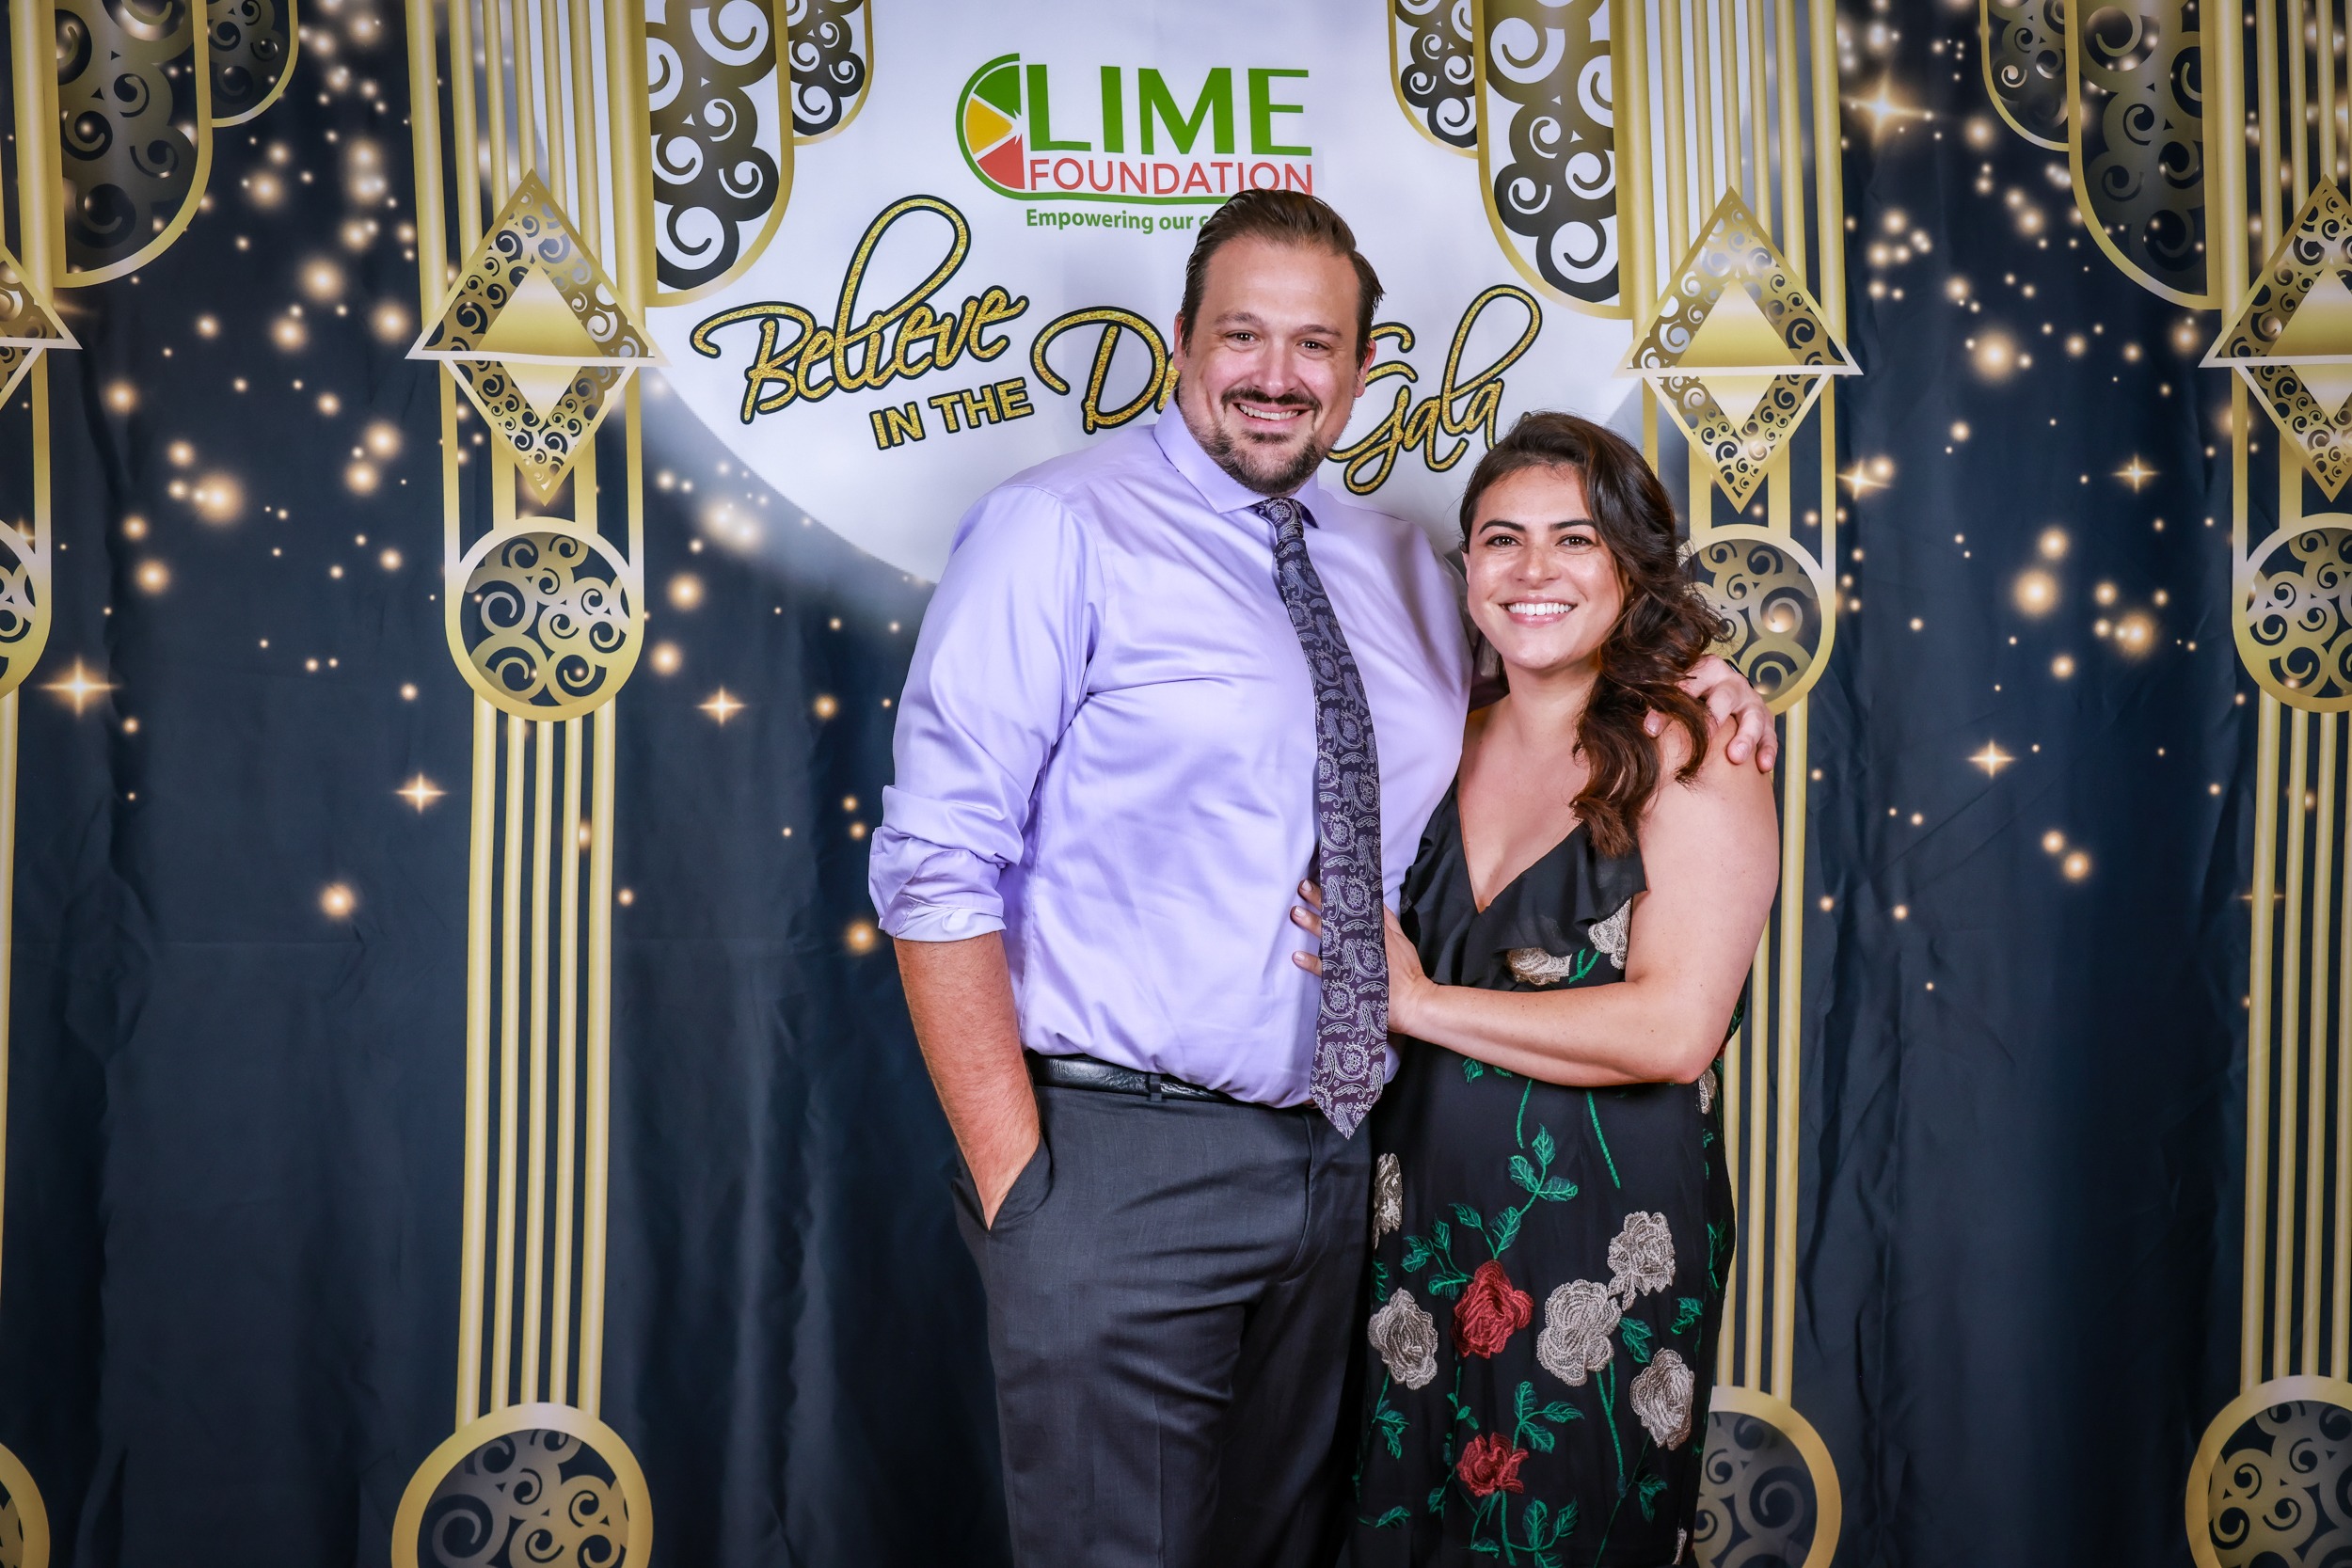 A man and woman posing for a photo in front of a backdrop provided by The LIME Foundation.